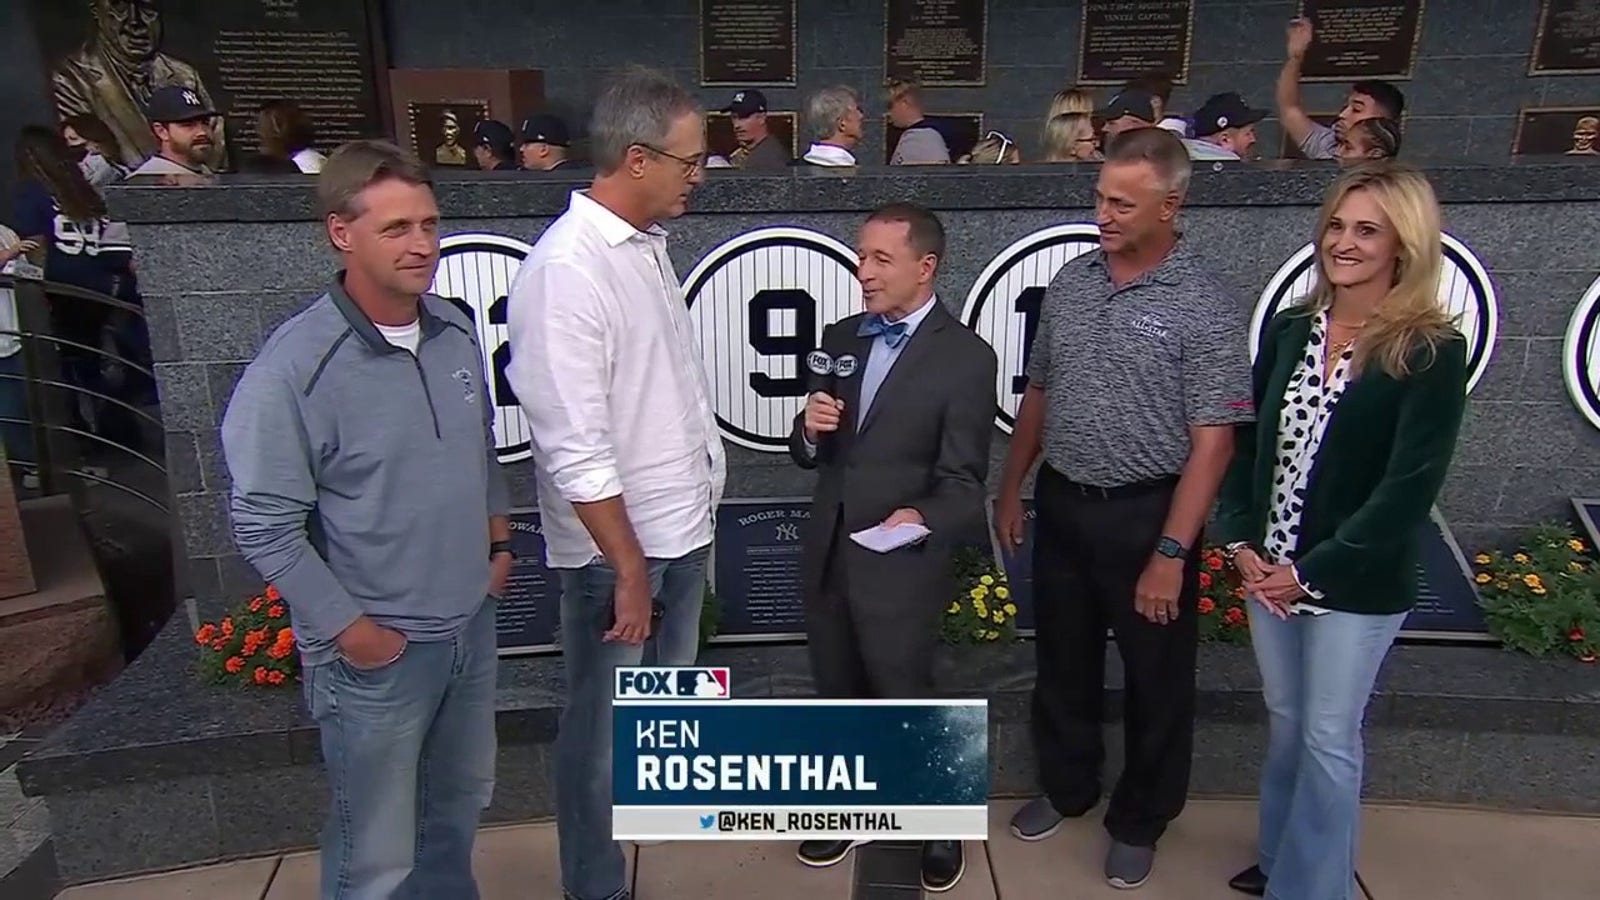 Ken Rosenthal talks with the family of Yankees legend Roger Maris